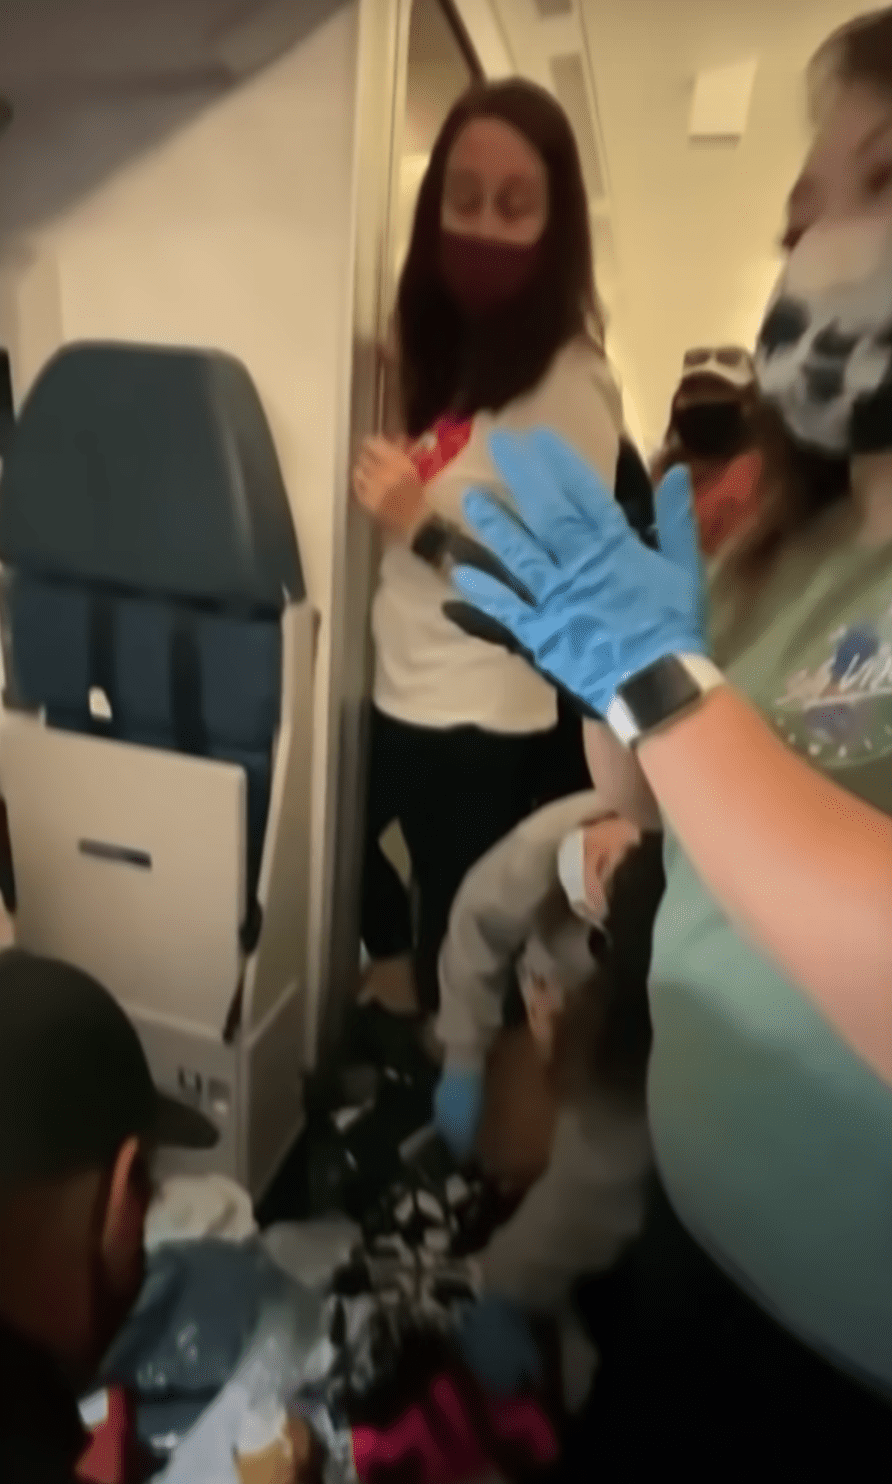 Nurses and doctors help a woman who gave birth mid-flight. | Source: youtube.com/TheEllenShow